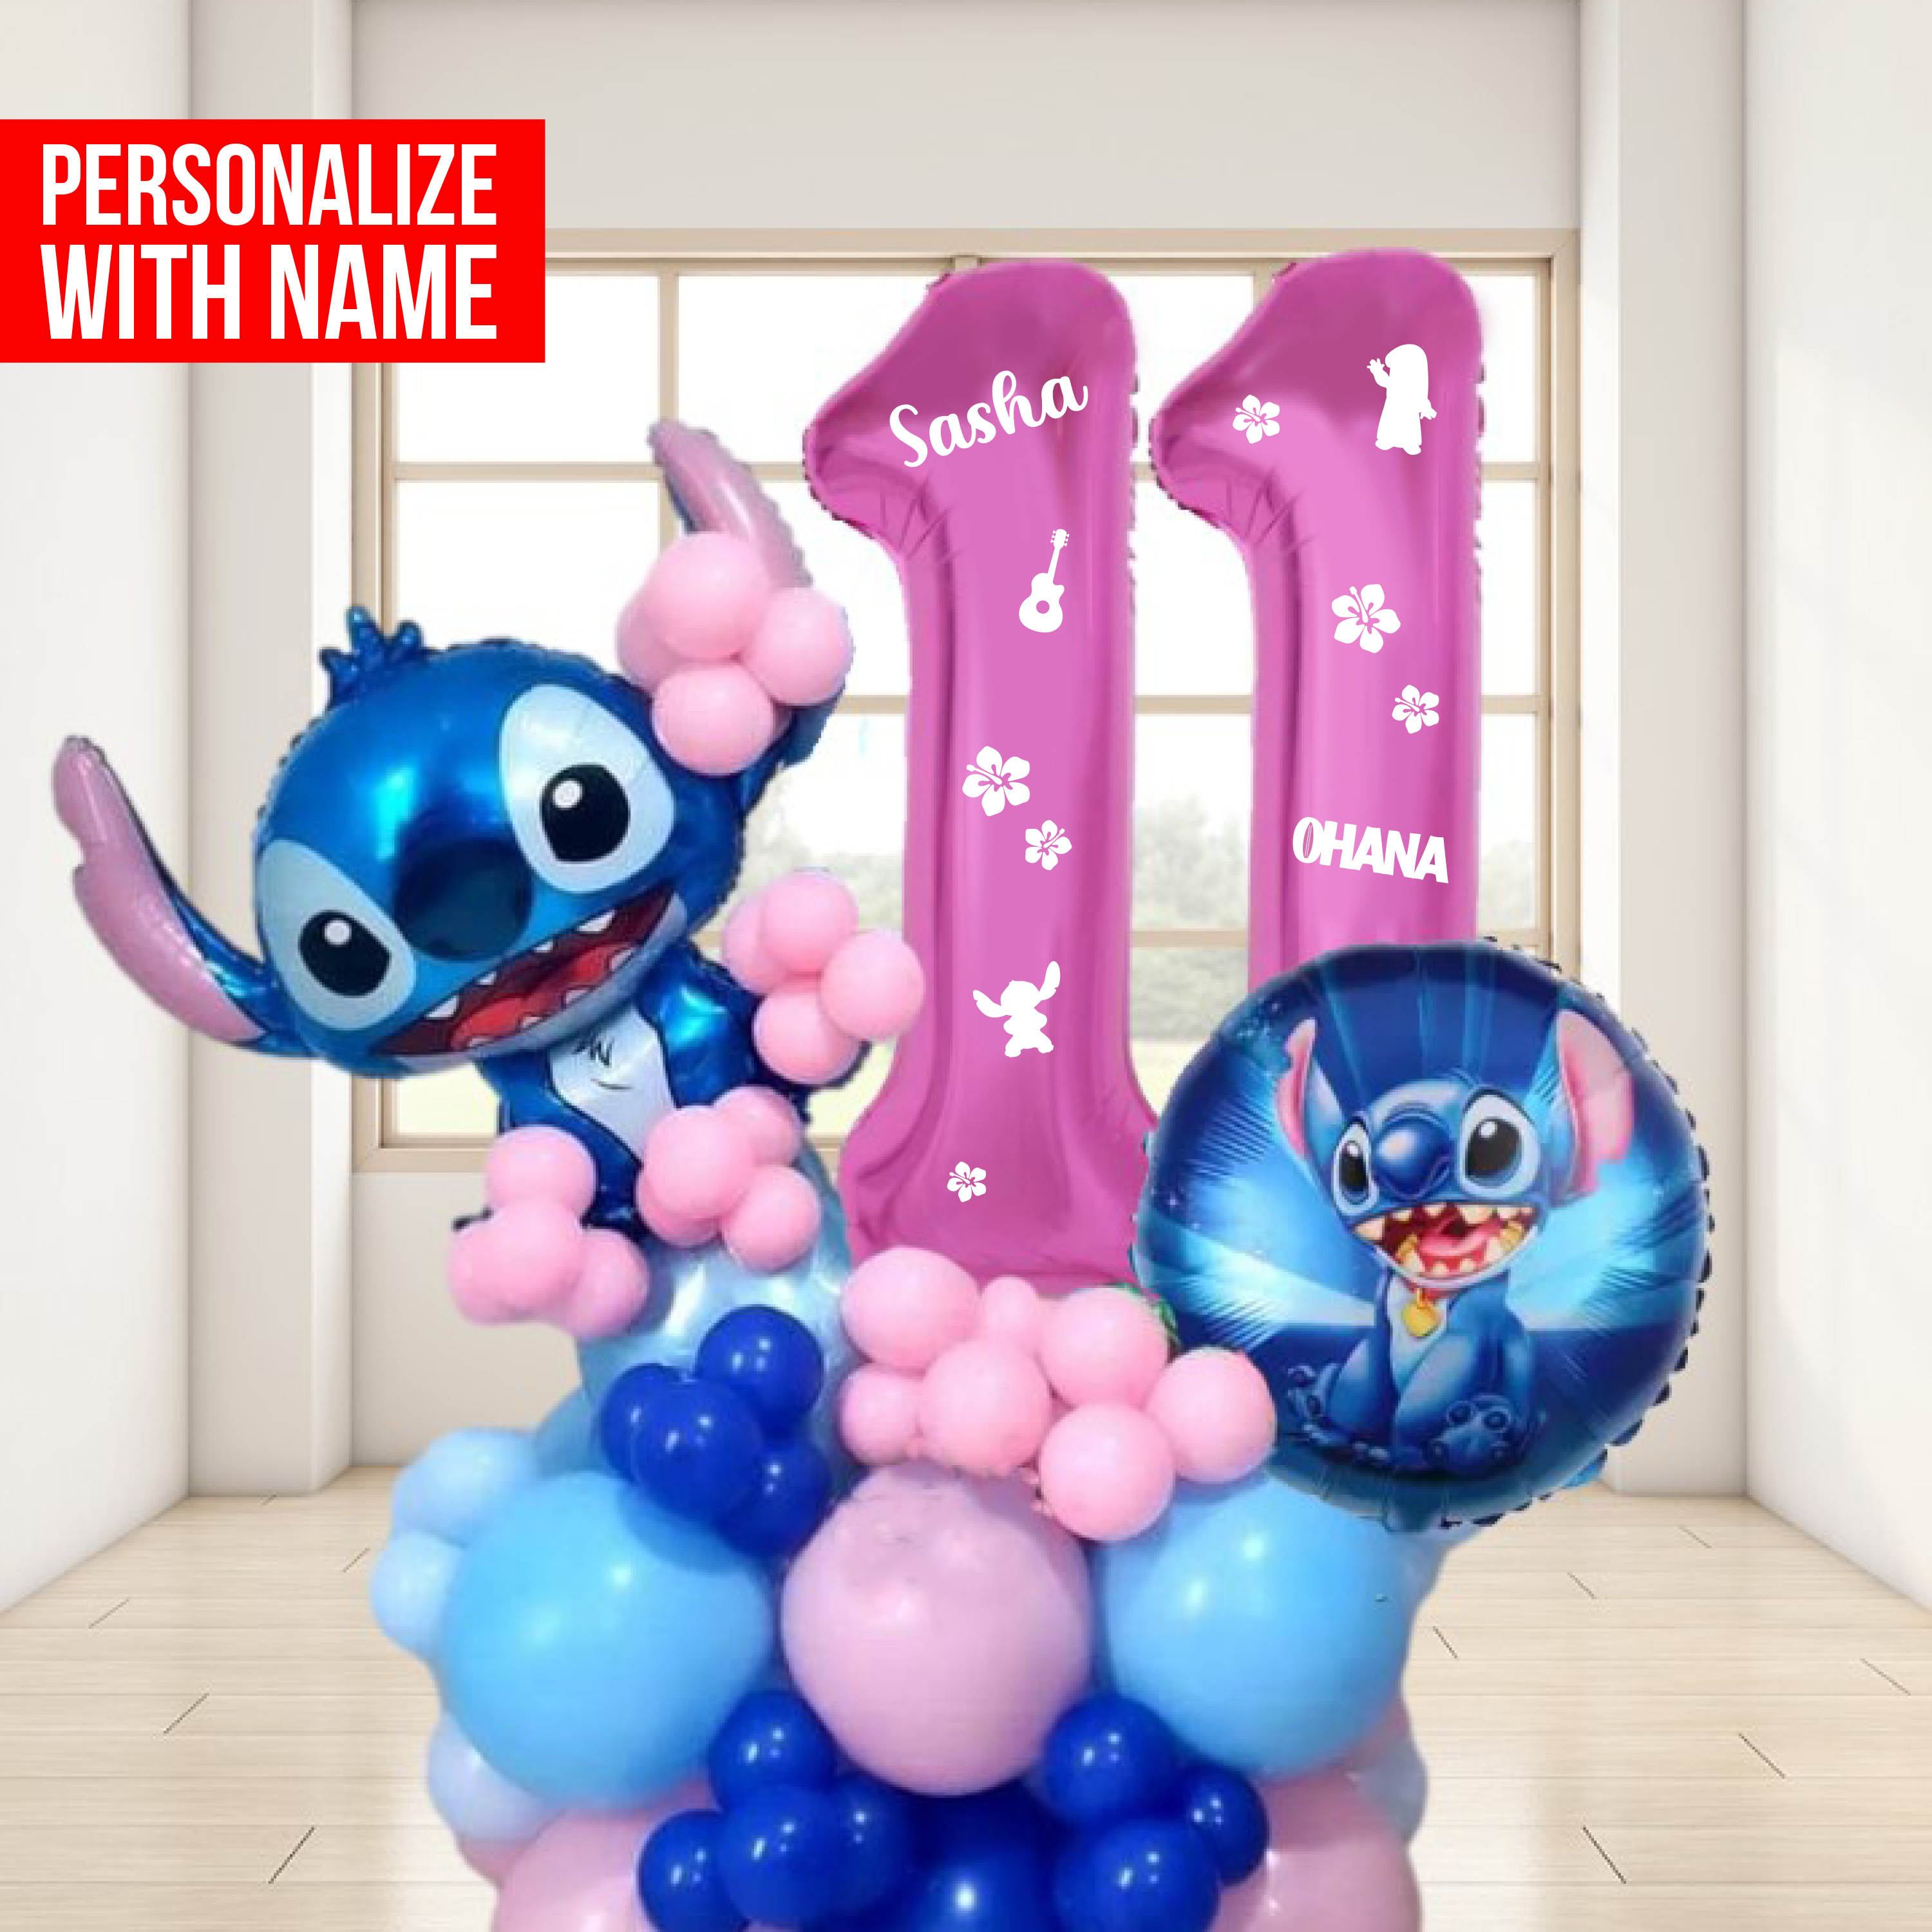 Lilo and Stitch Birthday Party Supplies Party Supplies Canada - Open A Party